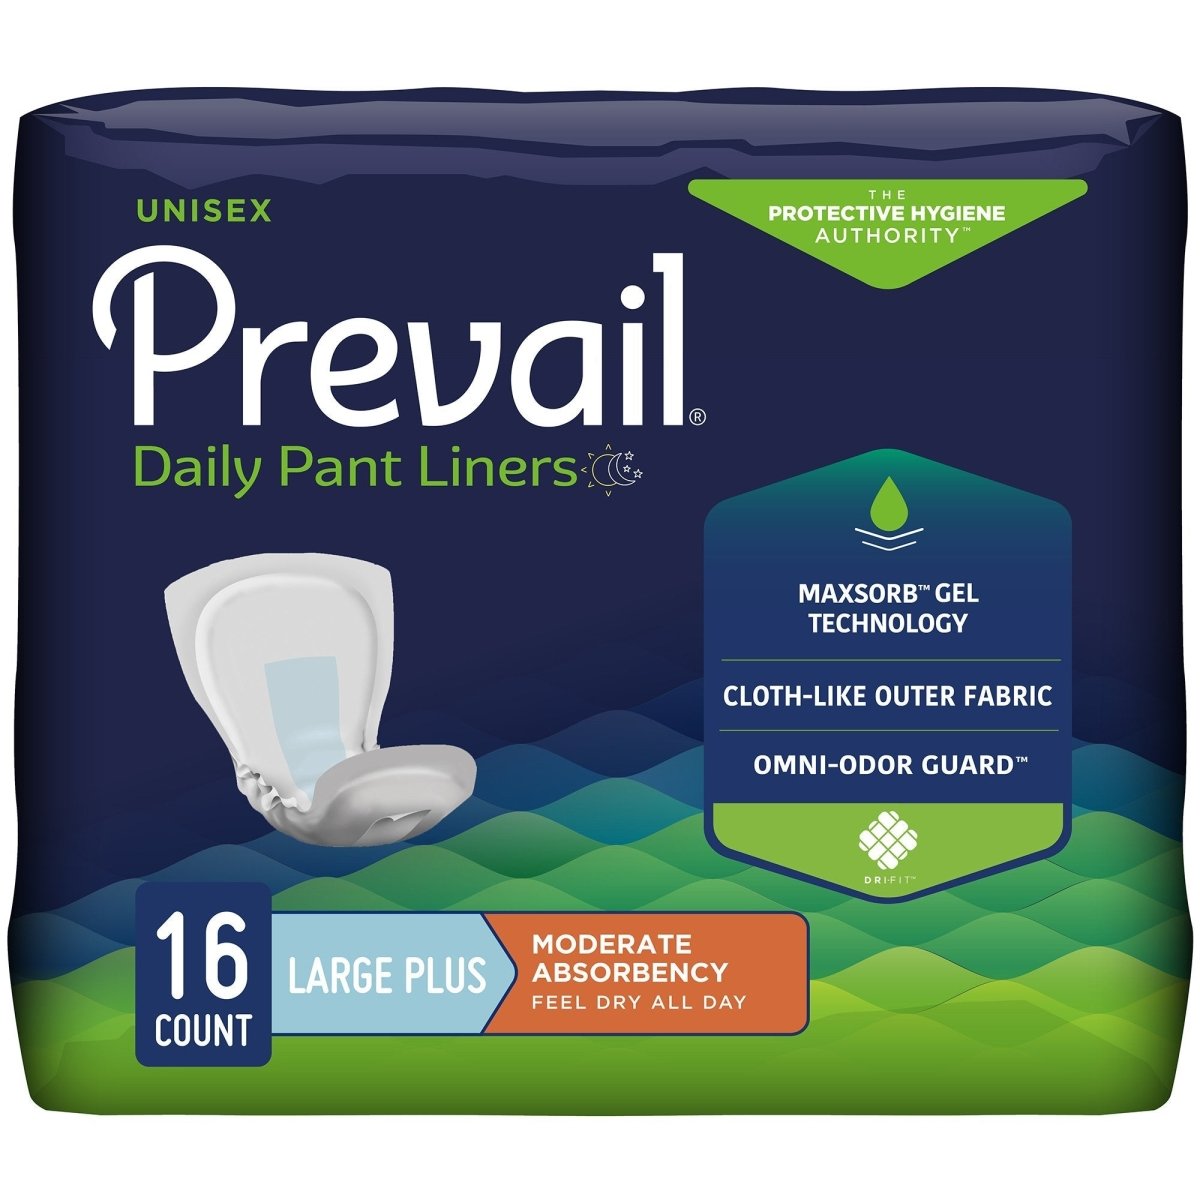 Prevail Daily Pant Liners - 747198_PK - 1